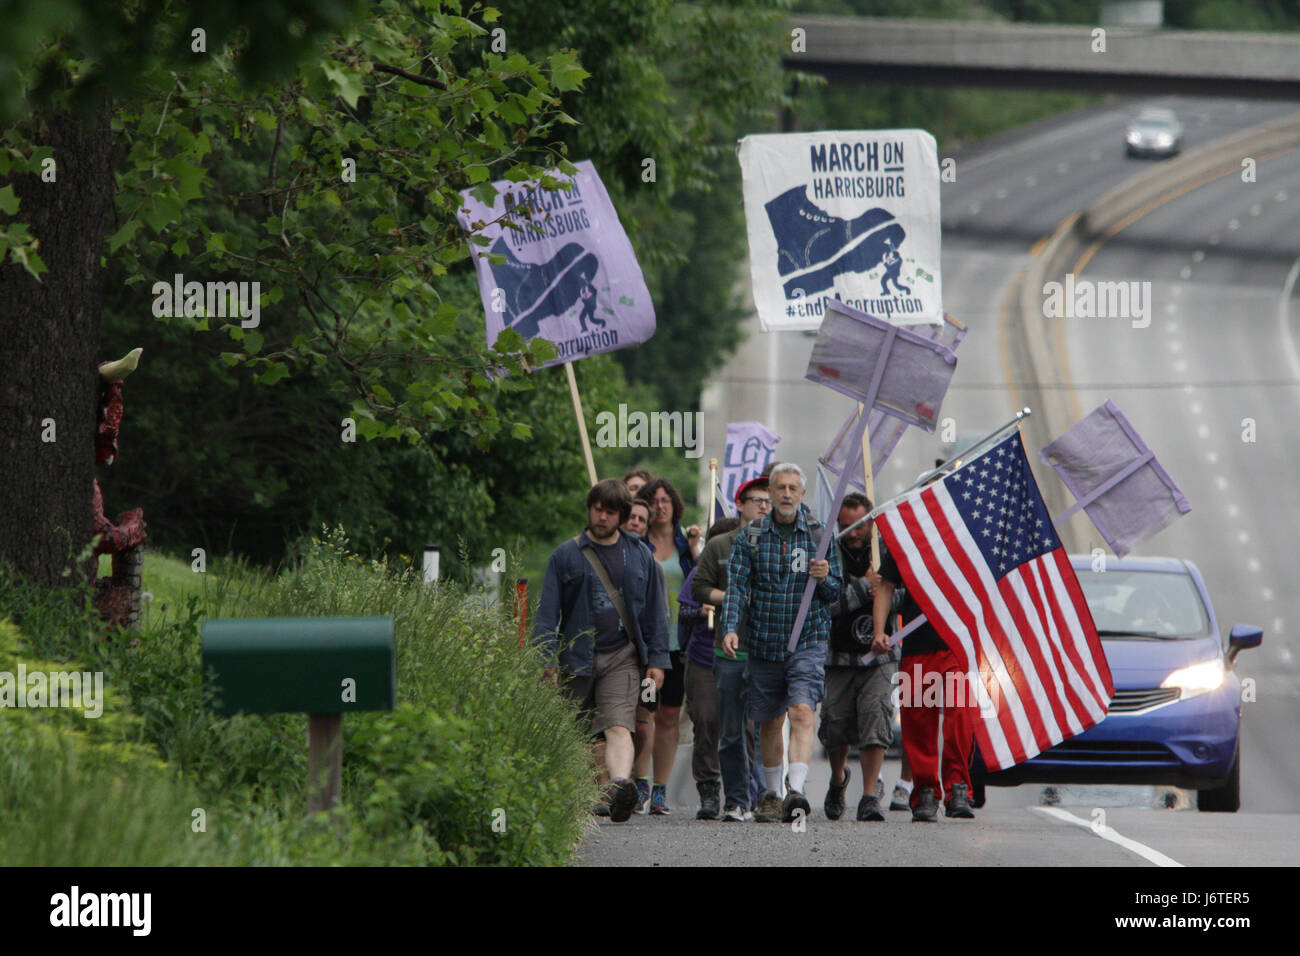 Harrisburg, PA., 21st May, 2017. A group of demonstrators, some of whom marched more than 100 miles from Philadelphia over the course of nine days, walk down the shoulder of US Route 322 near Hershey, PA, Sunday, May 21, 2017. The organizers plan on staging actions at the State Capitol building starting Monday, including planned civil disobedience. Credit: Michael Candelori/Alamy Live News Stock Photo